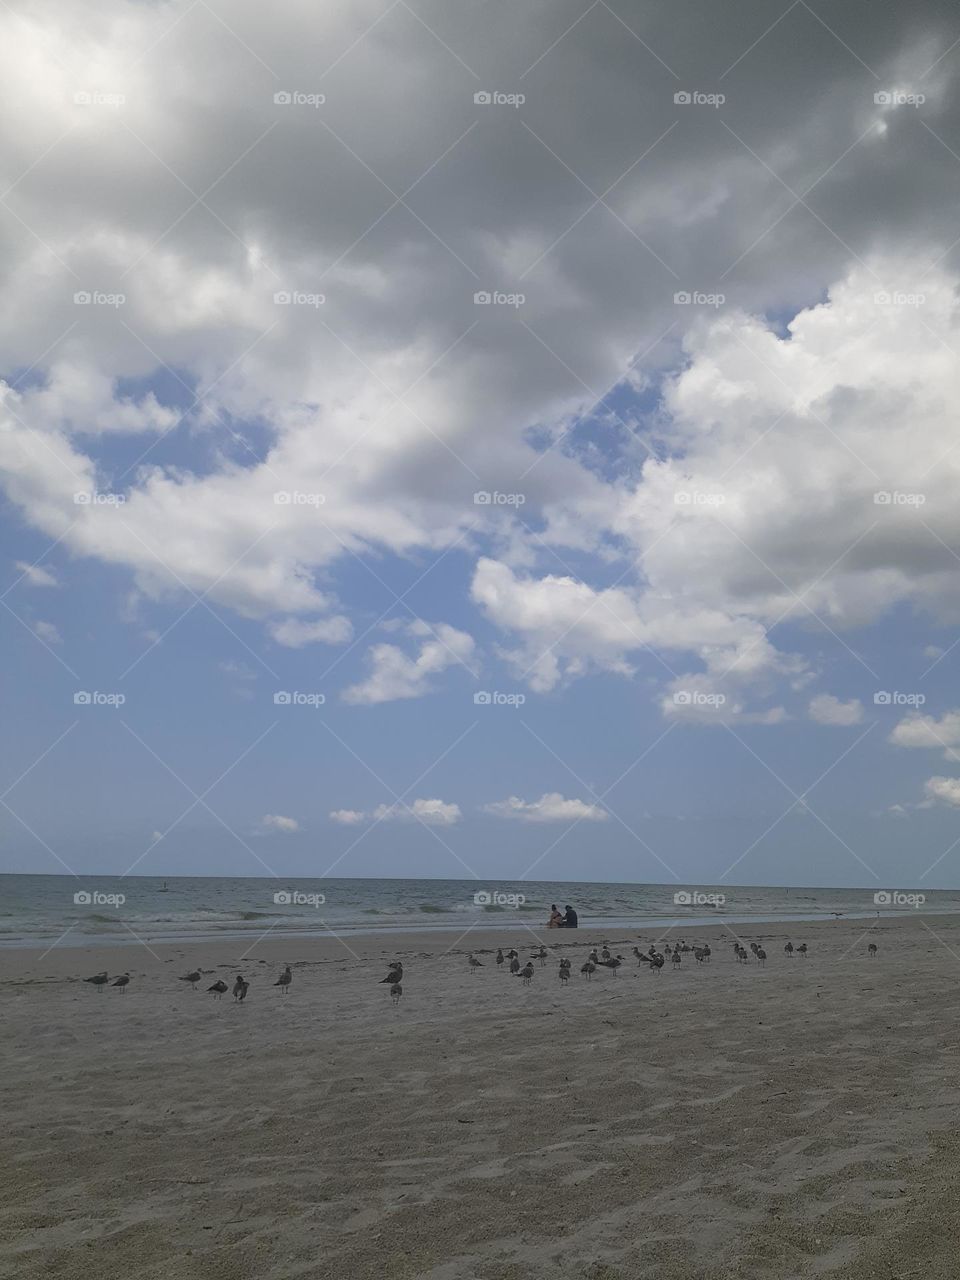 A landscape photo of Ponce Inlet Beach where many birds are on the beach. The sky was very cloudy this day.